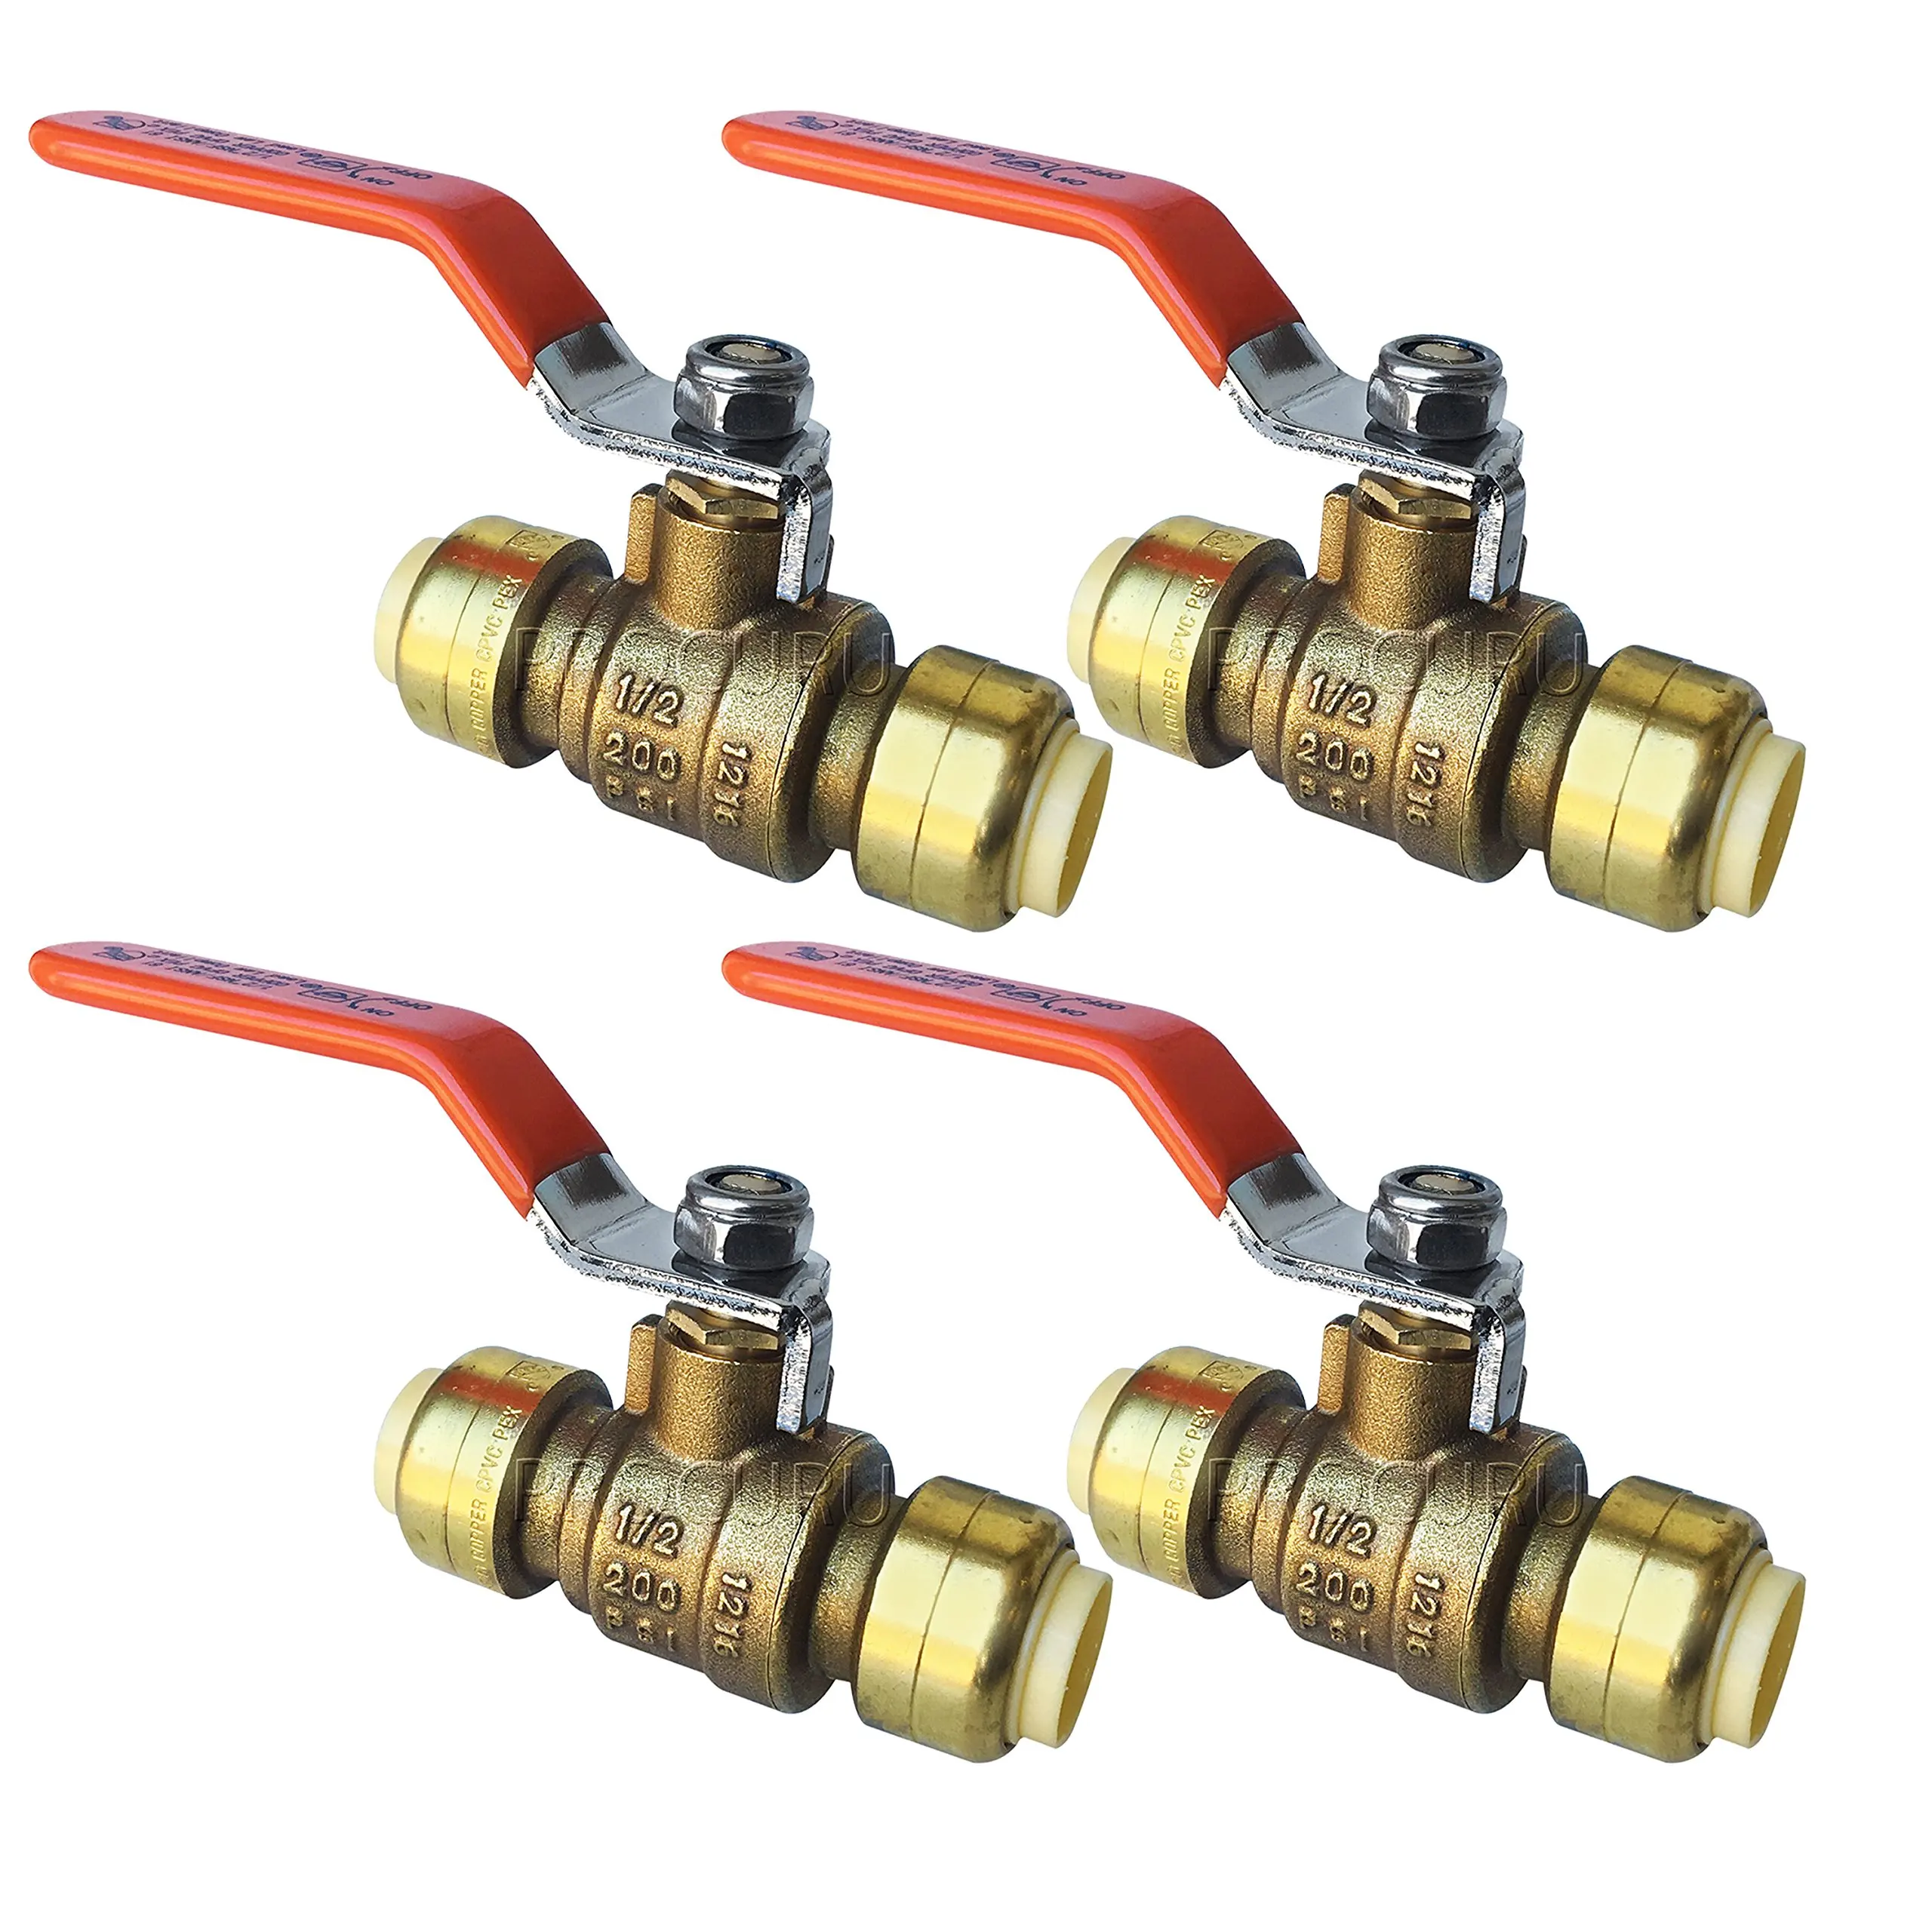 Cheap Copper Ball Valve With, find Copper Ball Valve With deals on line